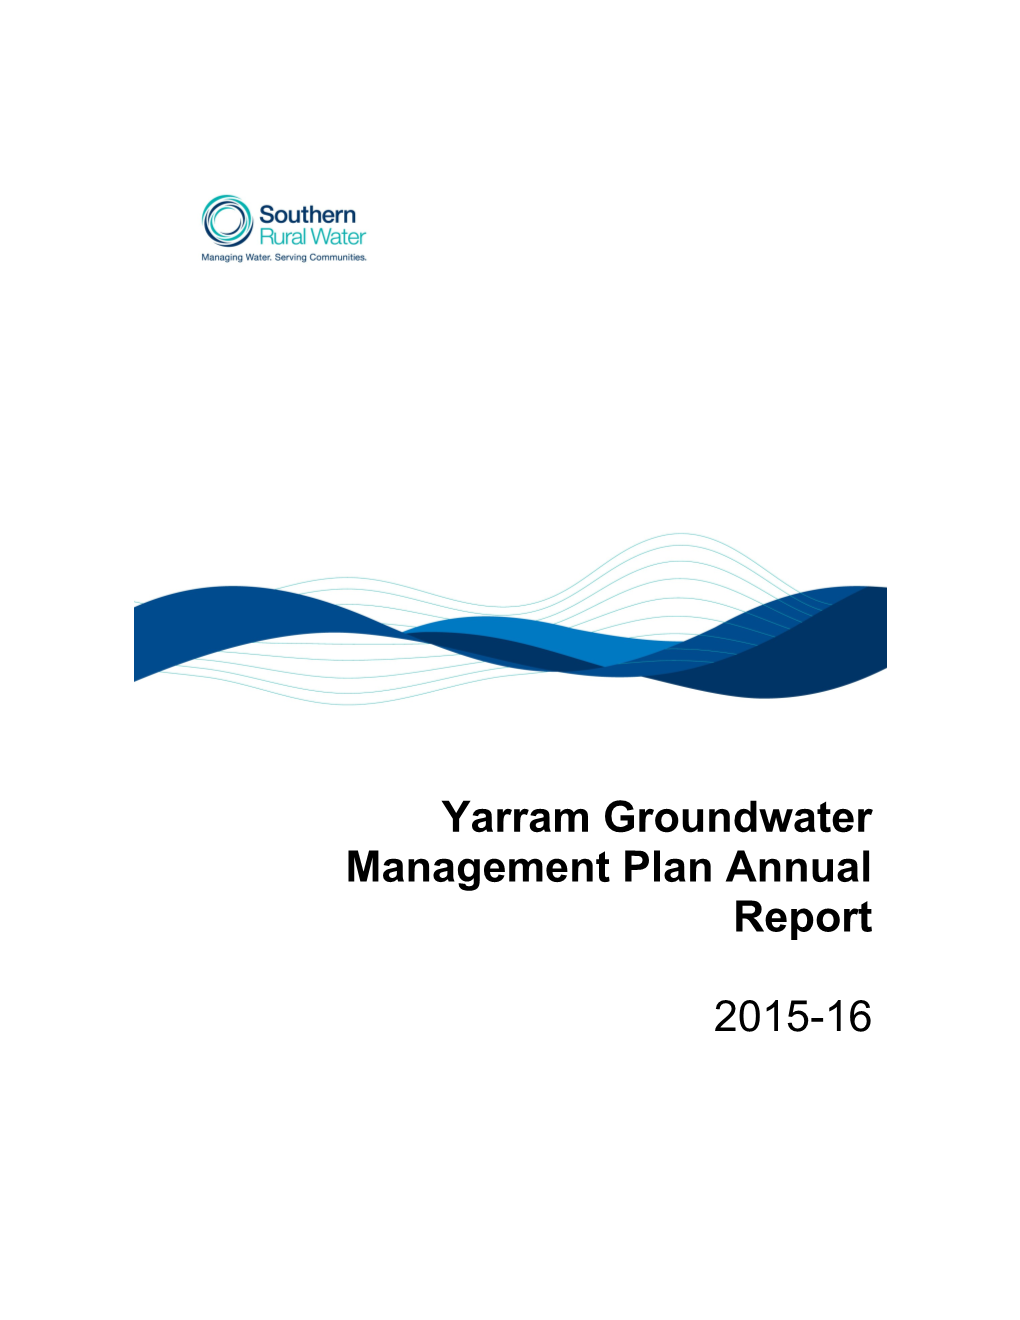 Yarram Groundwater Management Plan Annual Report 2015-2016